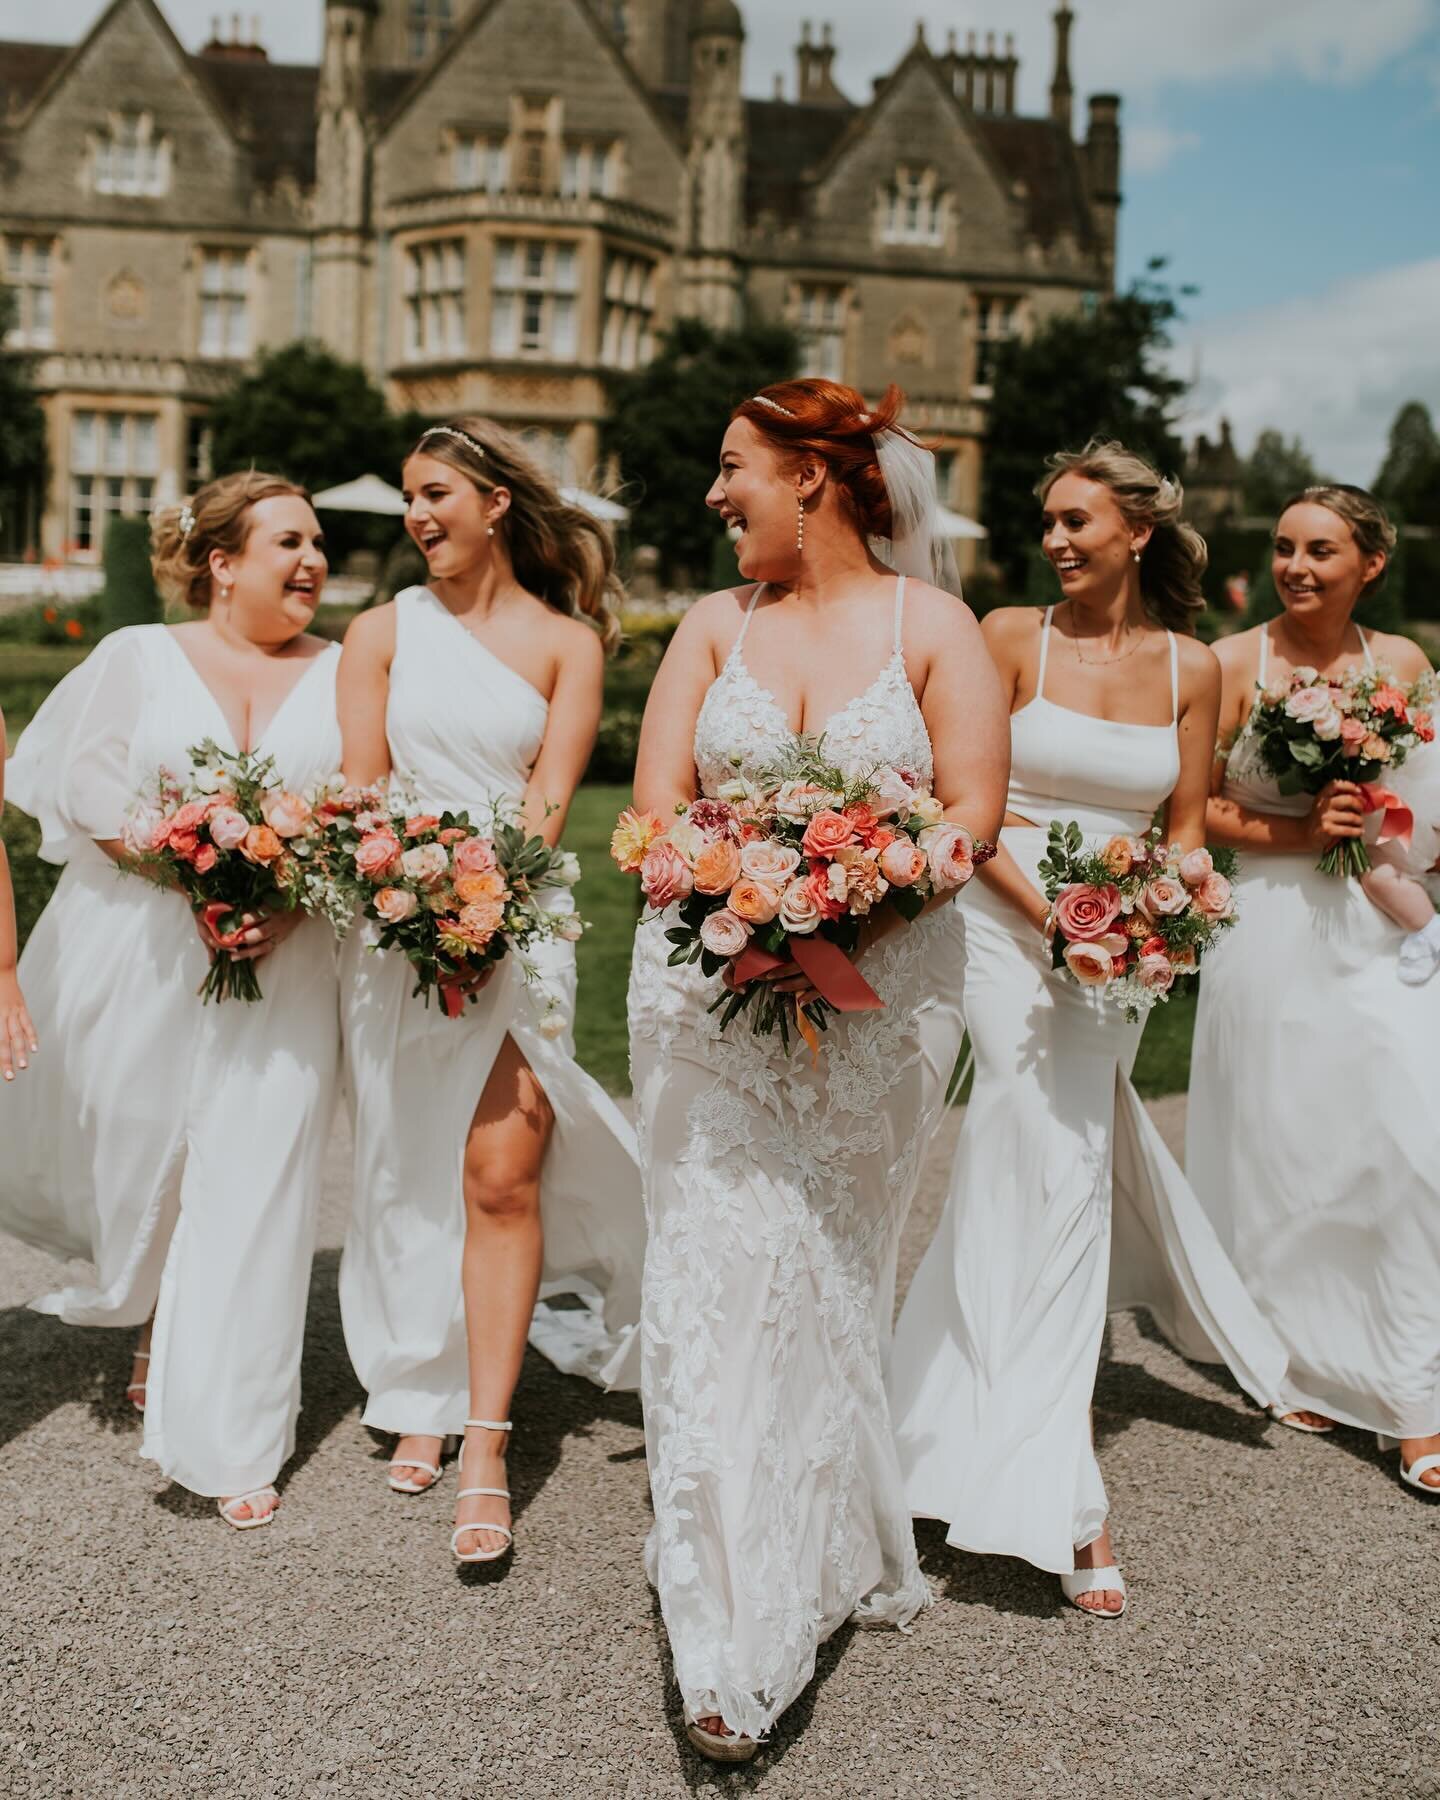 W H I T E  W E D D I N G 🤍
.
Maids in white? Absolutely here for it. Big time 🤍🤍🤍
,
Kayleigh &amp; crew looking super freeeeeessshhhh 🤍🤍🤍
.
Shot by talented, wonderful @marywtphoto 🤍🤍🤍
Oh! And the flowers&hellip;.a gelato &amp; sorbet dream